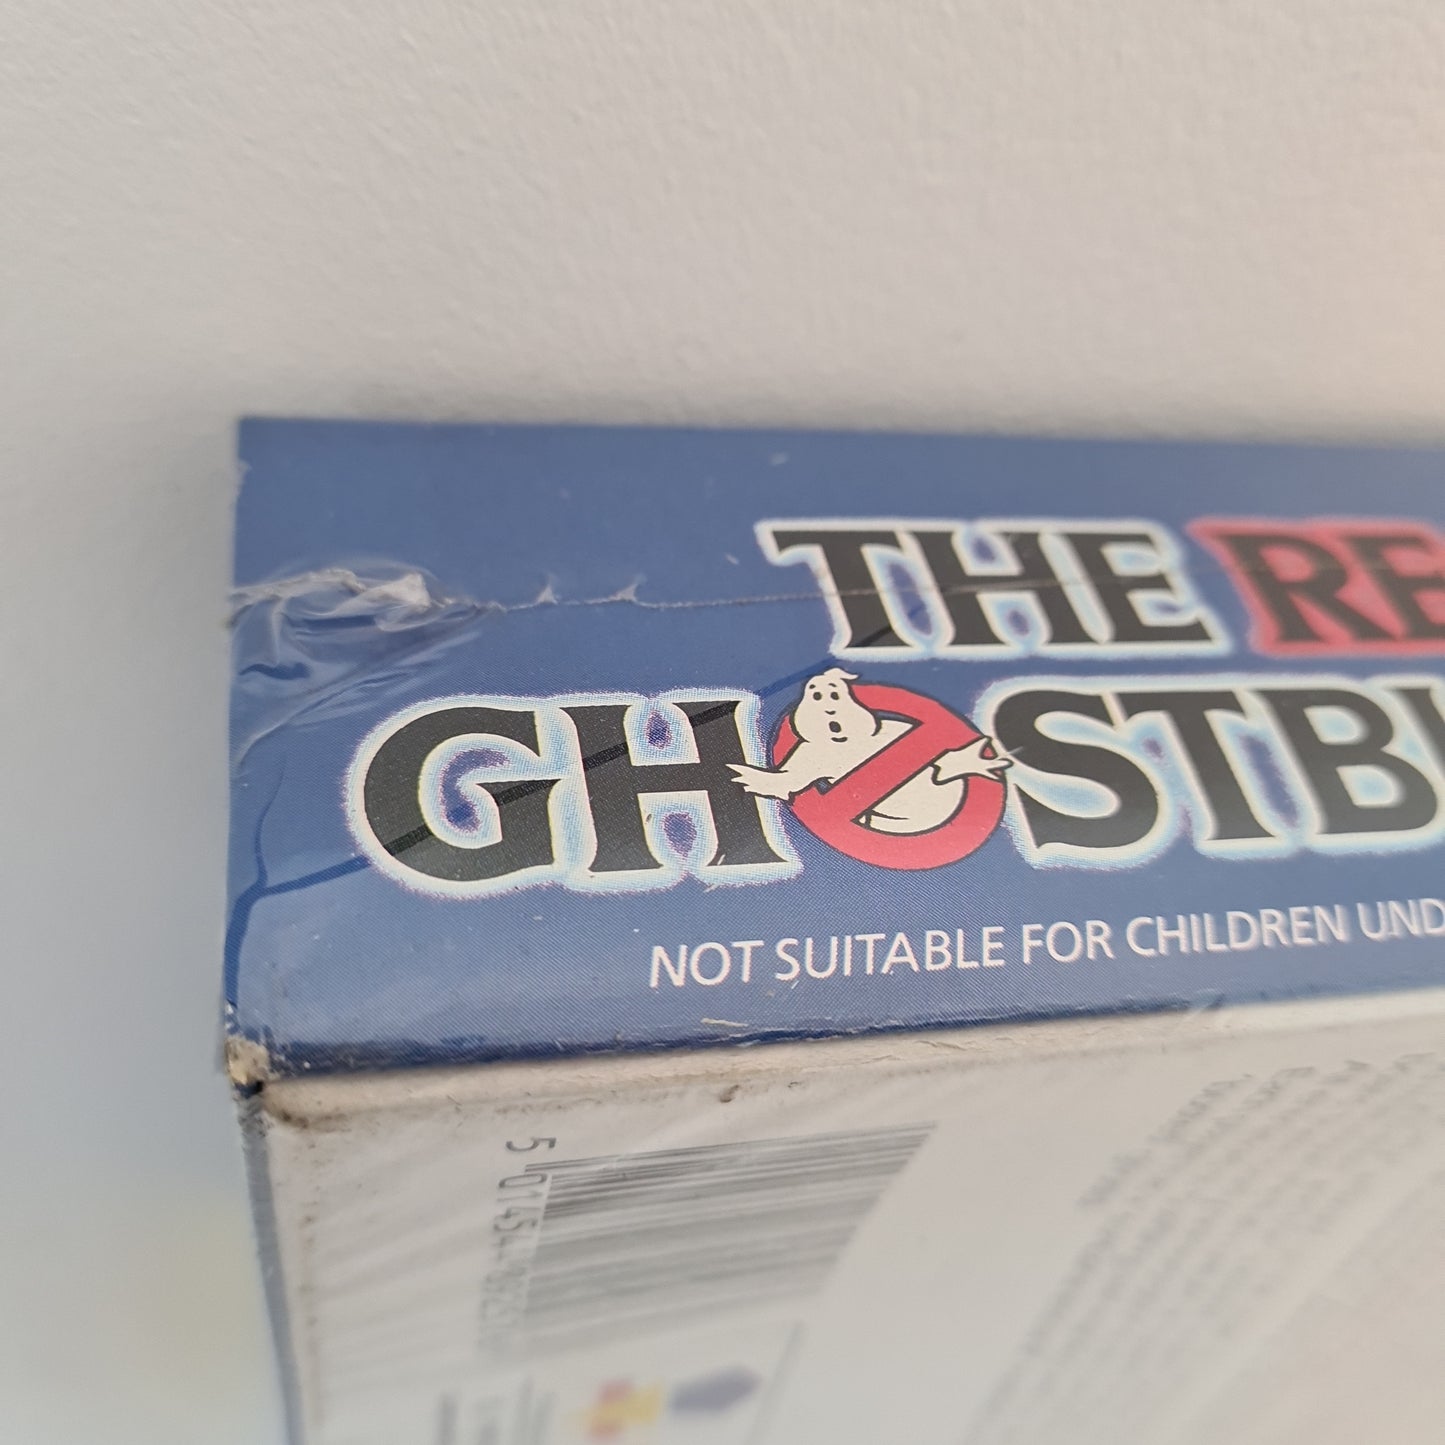 The Real Ghostbusters 'The Game' 1989